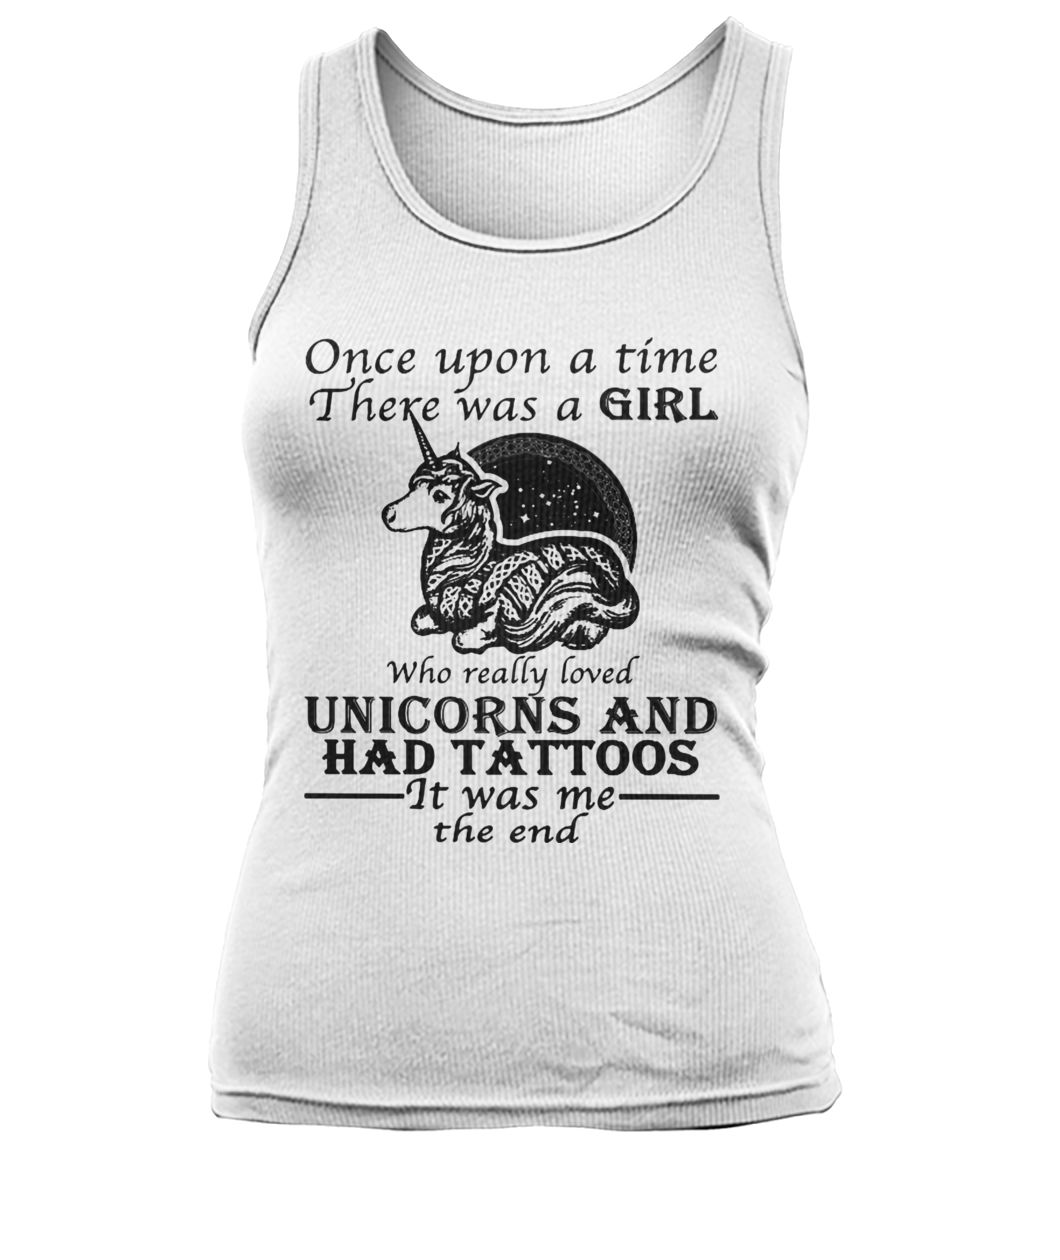 Once upon a time there was a girl who really loved unicorns and had tattoos it was me the end women's tank top